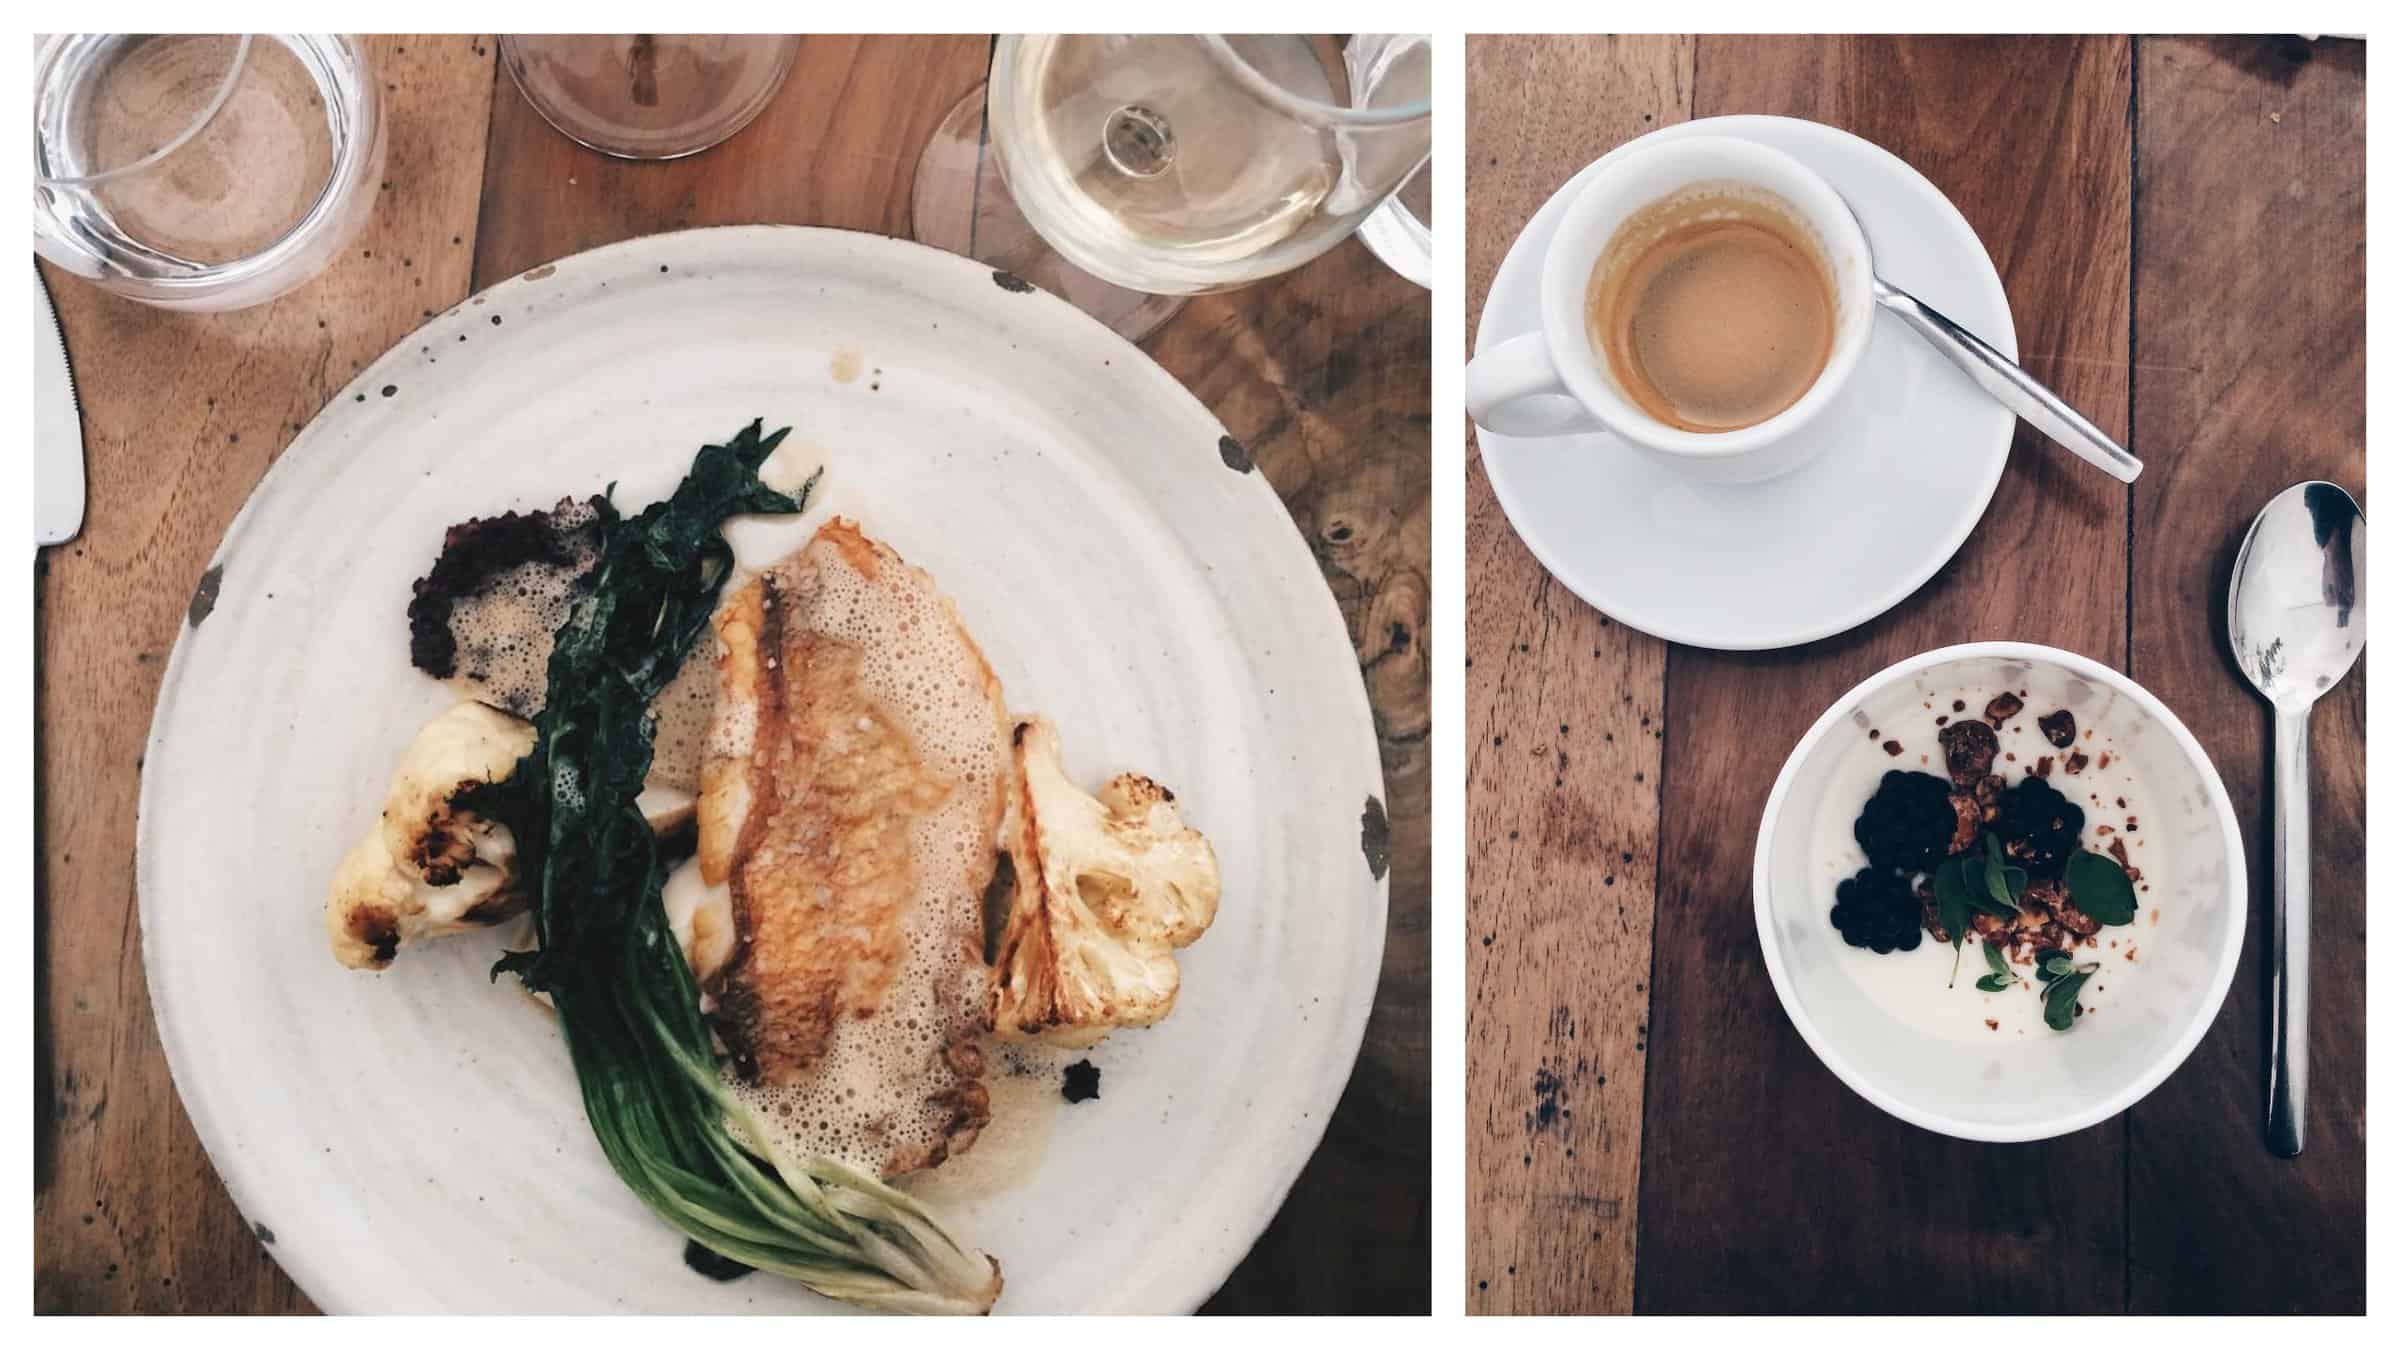 One of the best bistros for French food in Paris, is Dilia for its meat and vegetable dishes (left) and dessert with coffee (right).